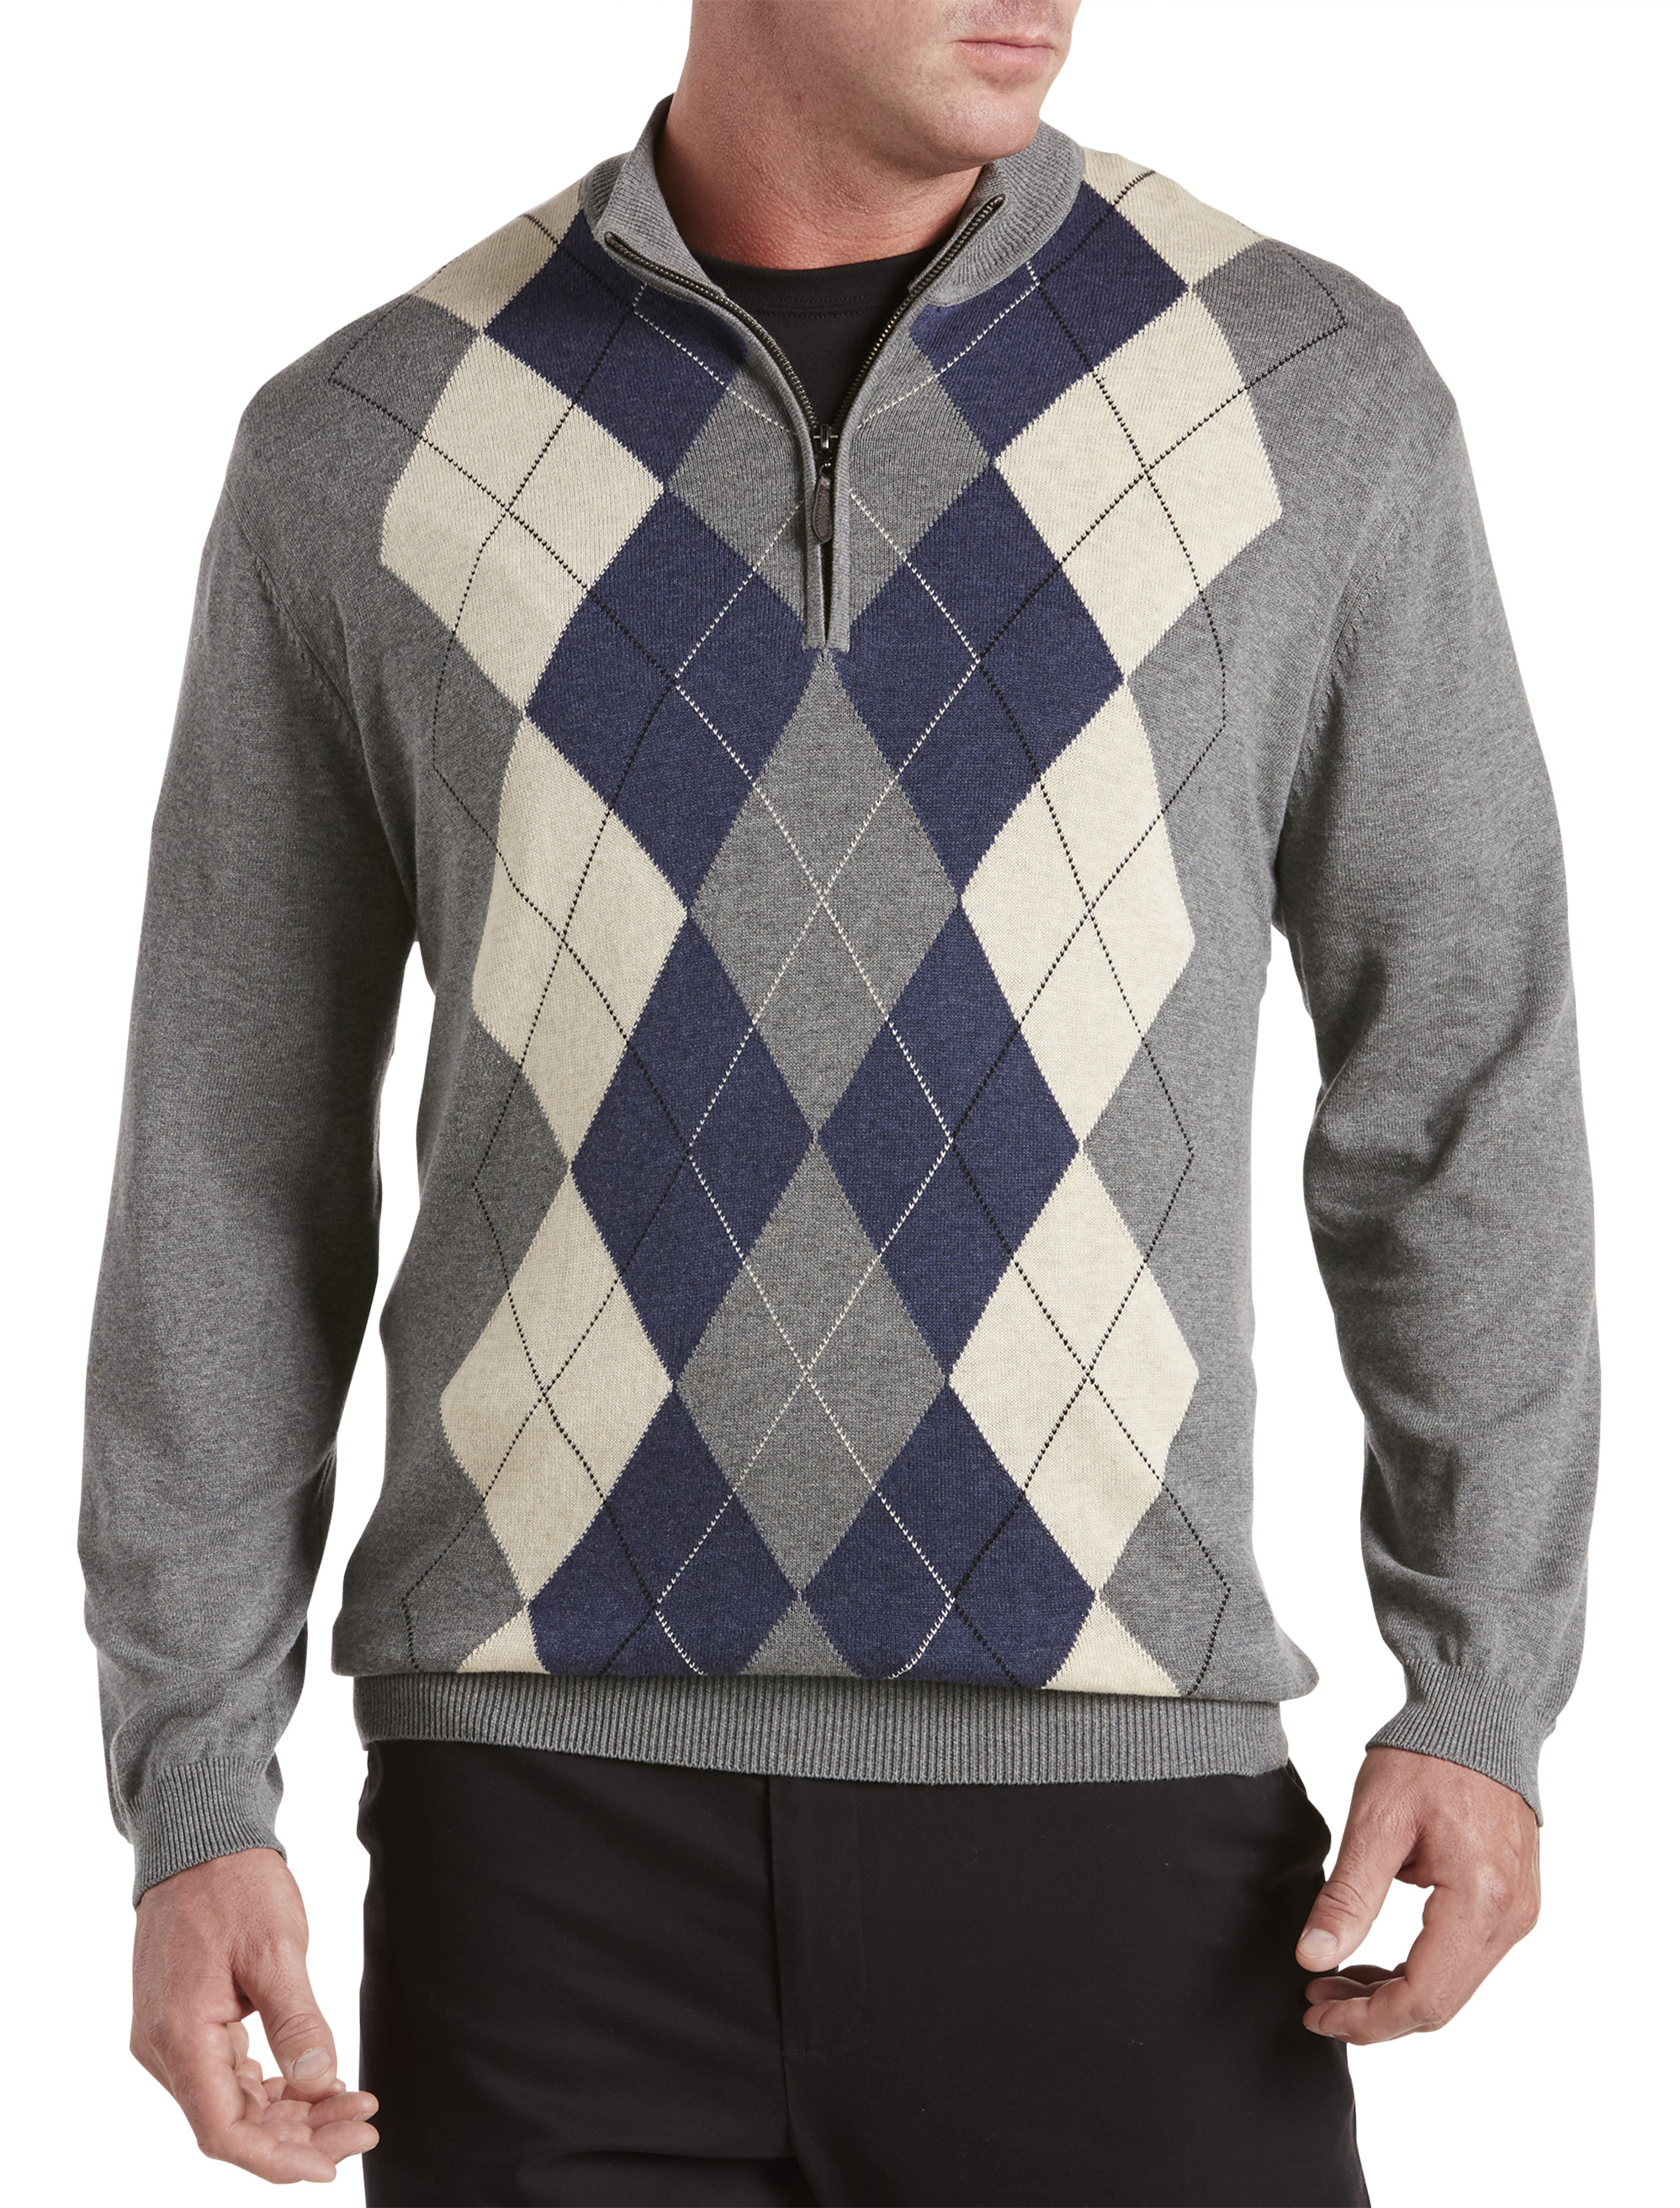 Big & Tall Sweaters and Sweater Vests for Men | CasualMaleXL